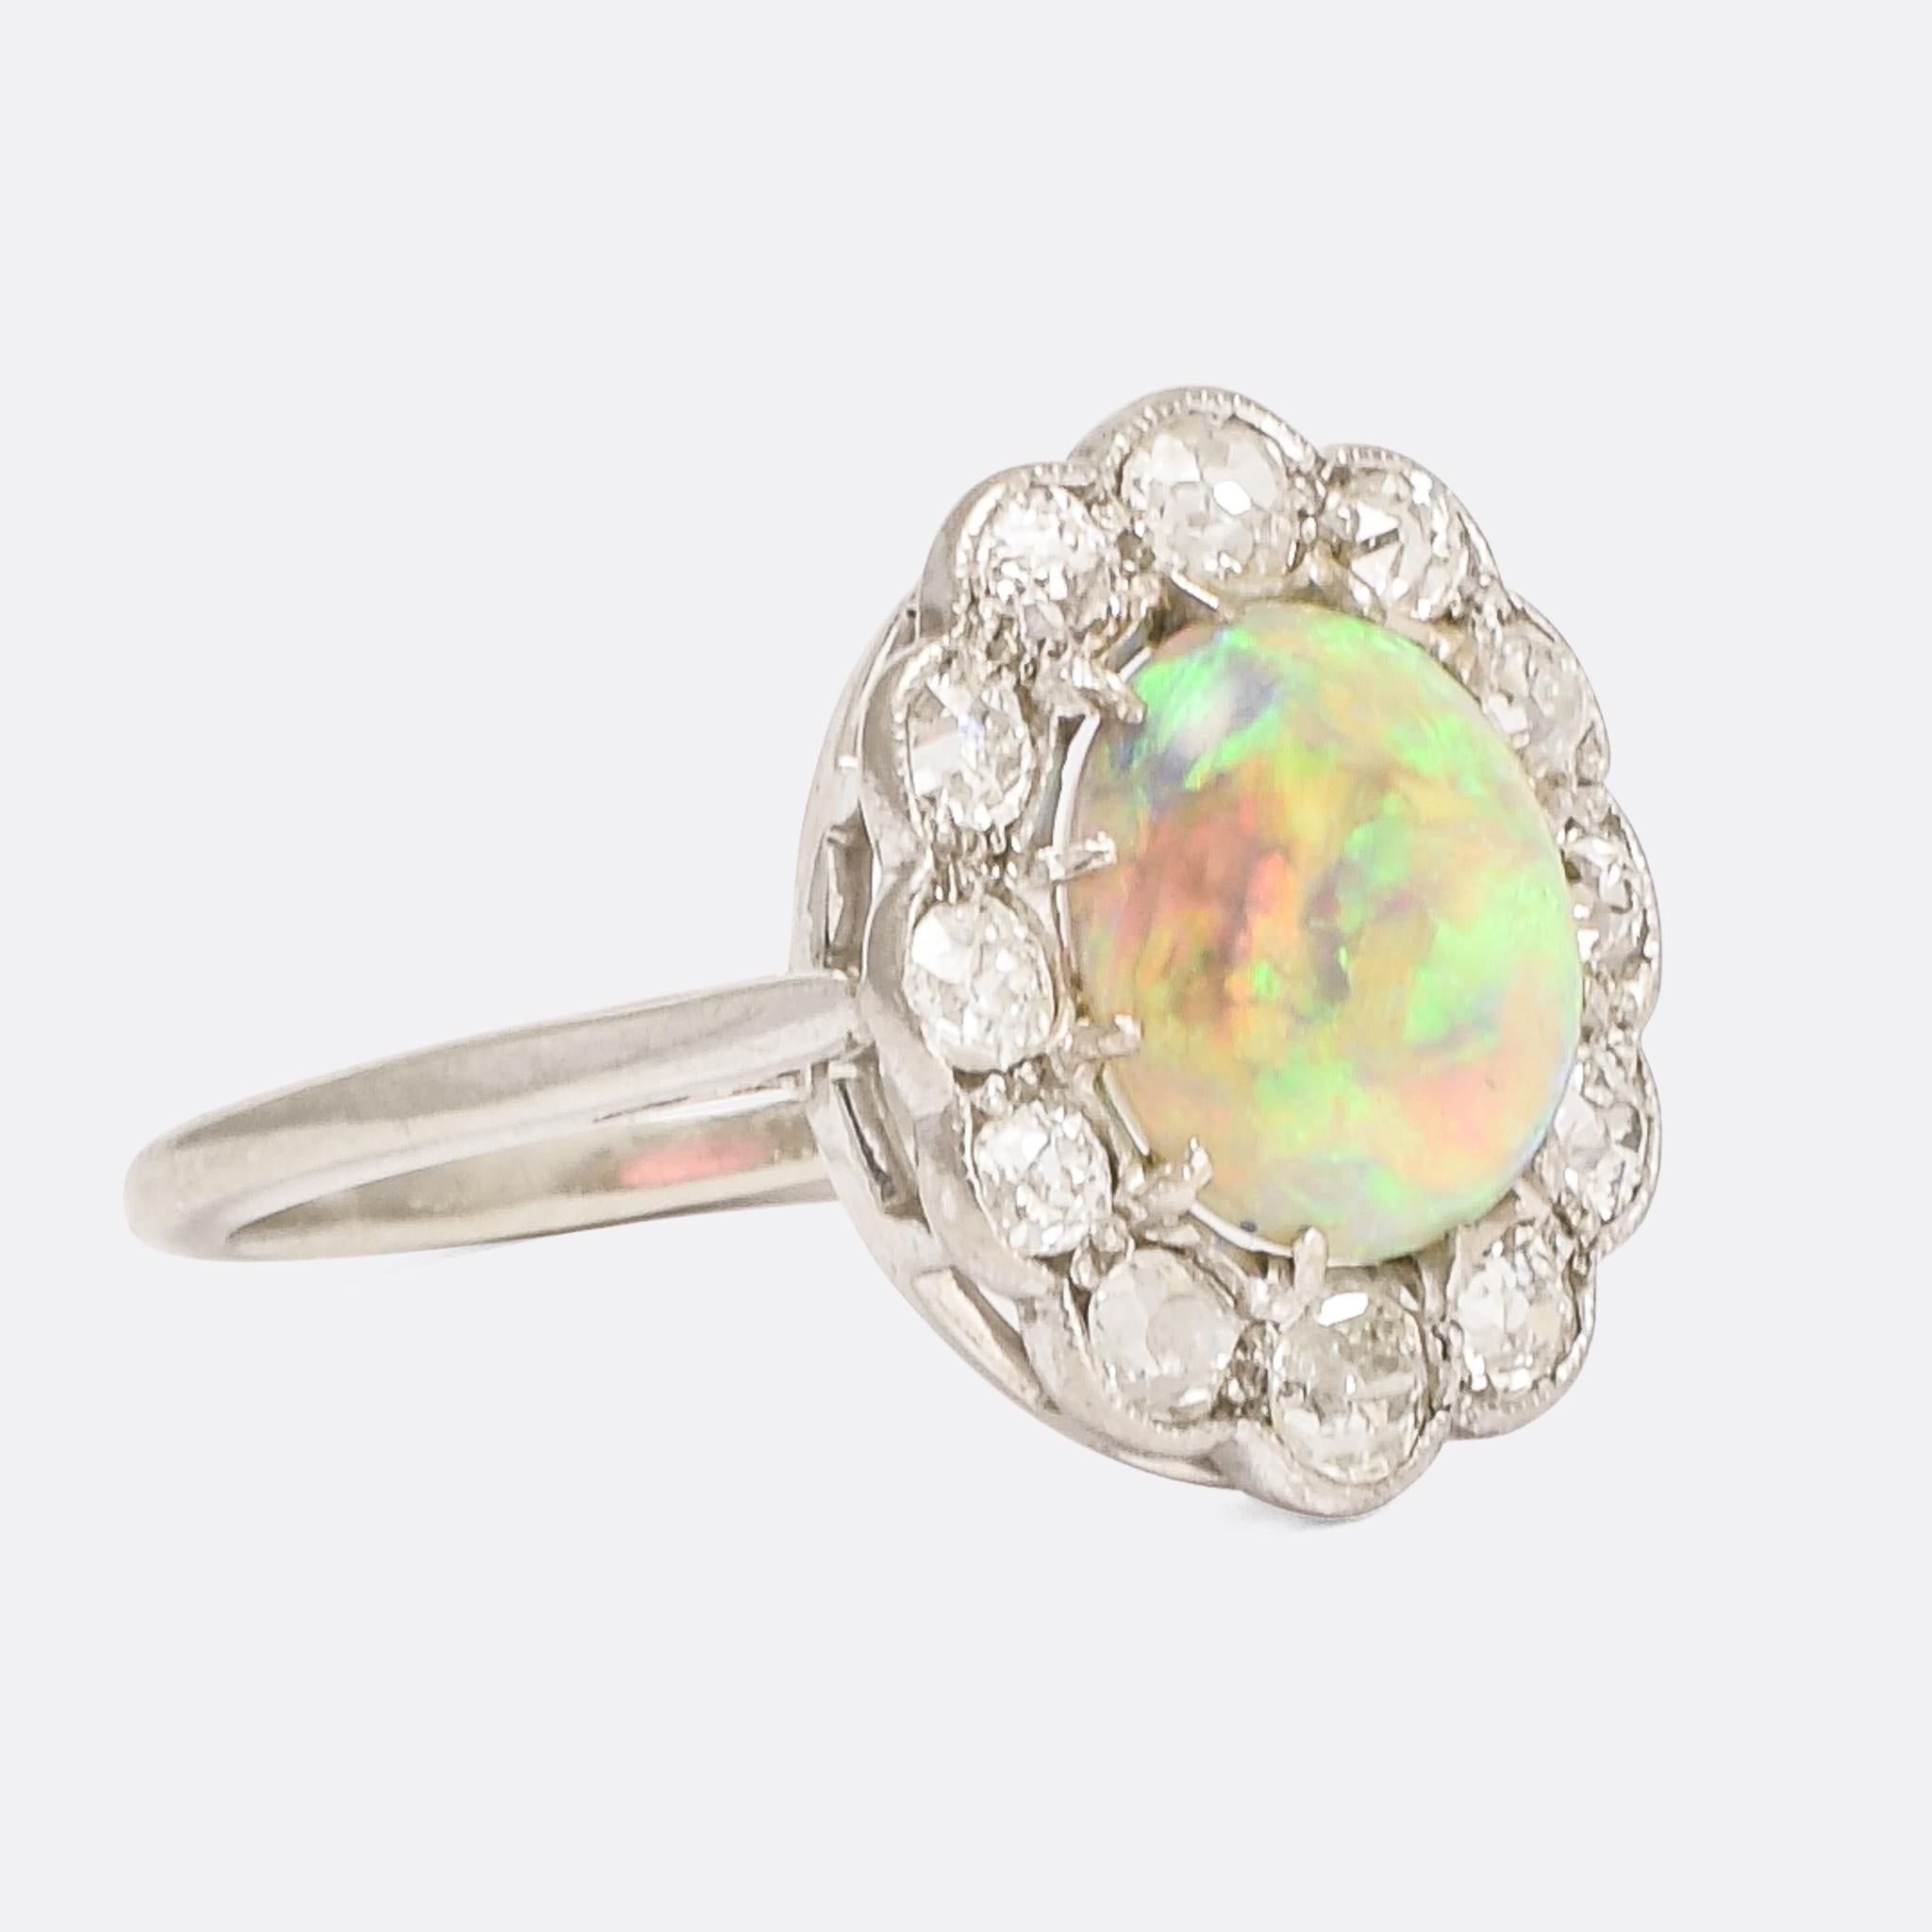 A stunning opal and diamond cluster ring dating from the early 20th Century. The main event is a fiery white opal, displaying vibrant greens, blues and yellows with an orange underglow. It's surrounded by a halo of old mine cut diamonds - totalling